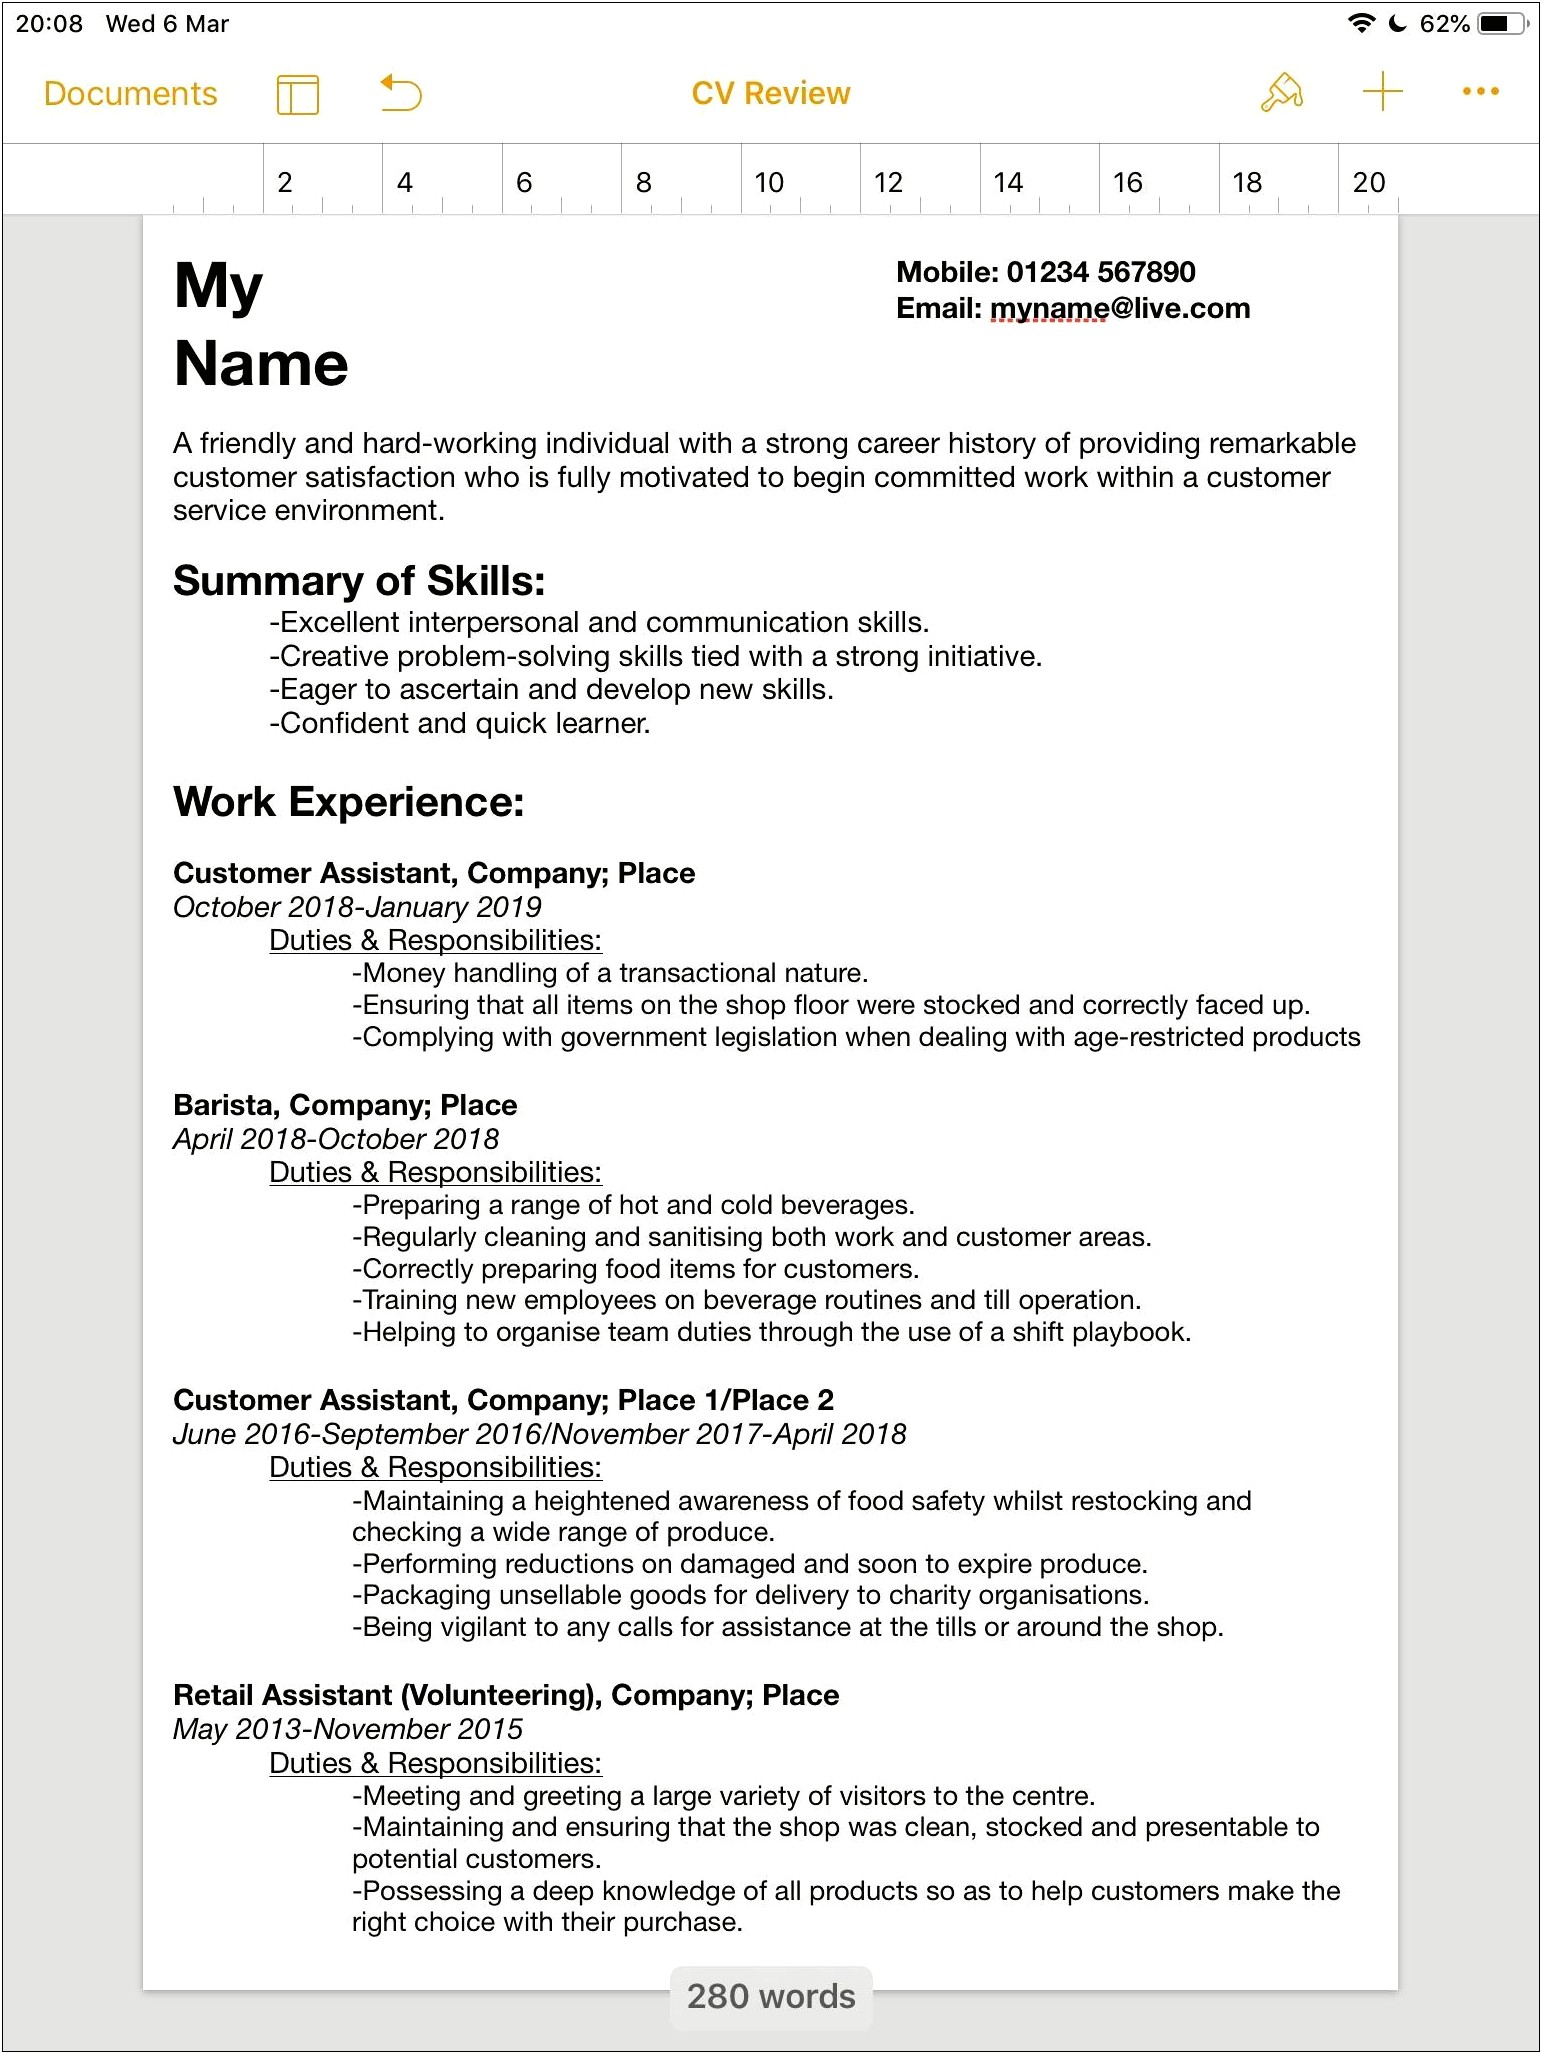 A Part Time Job Resume